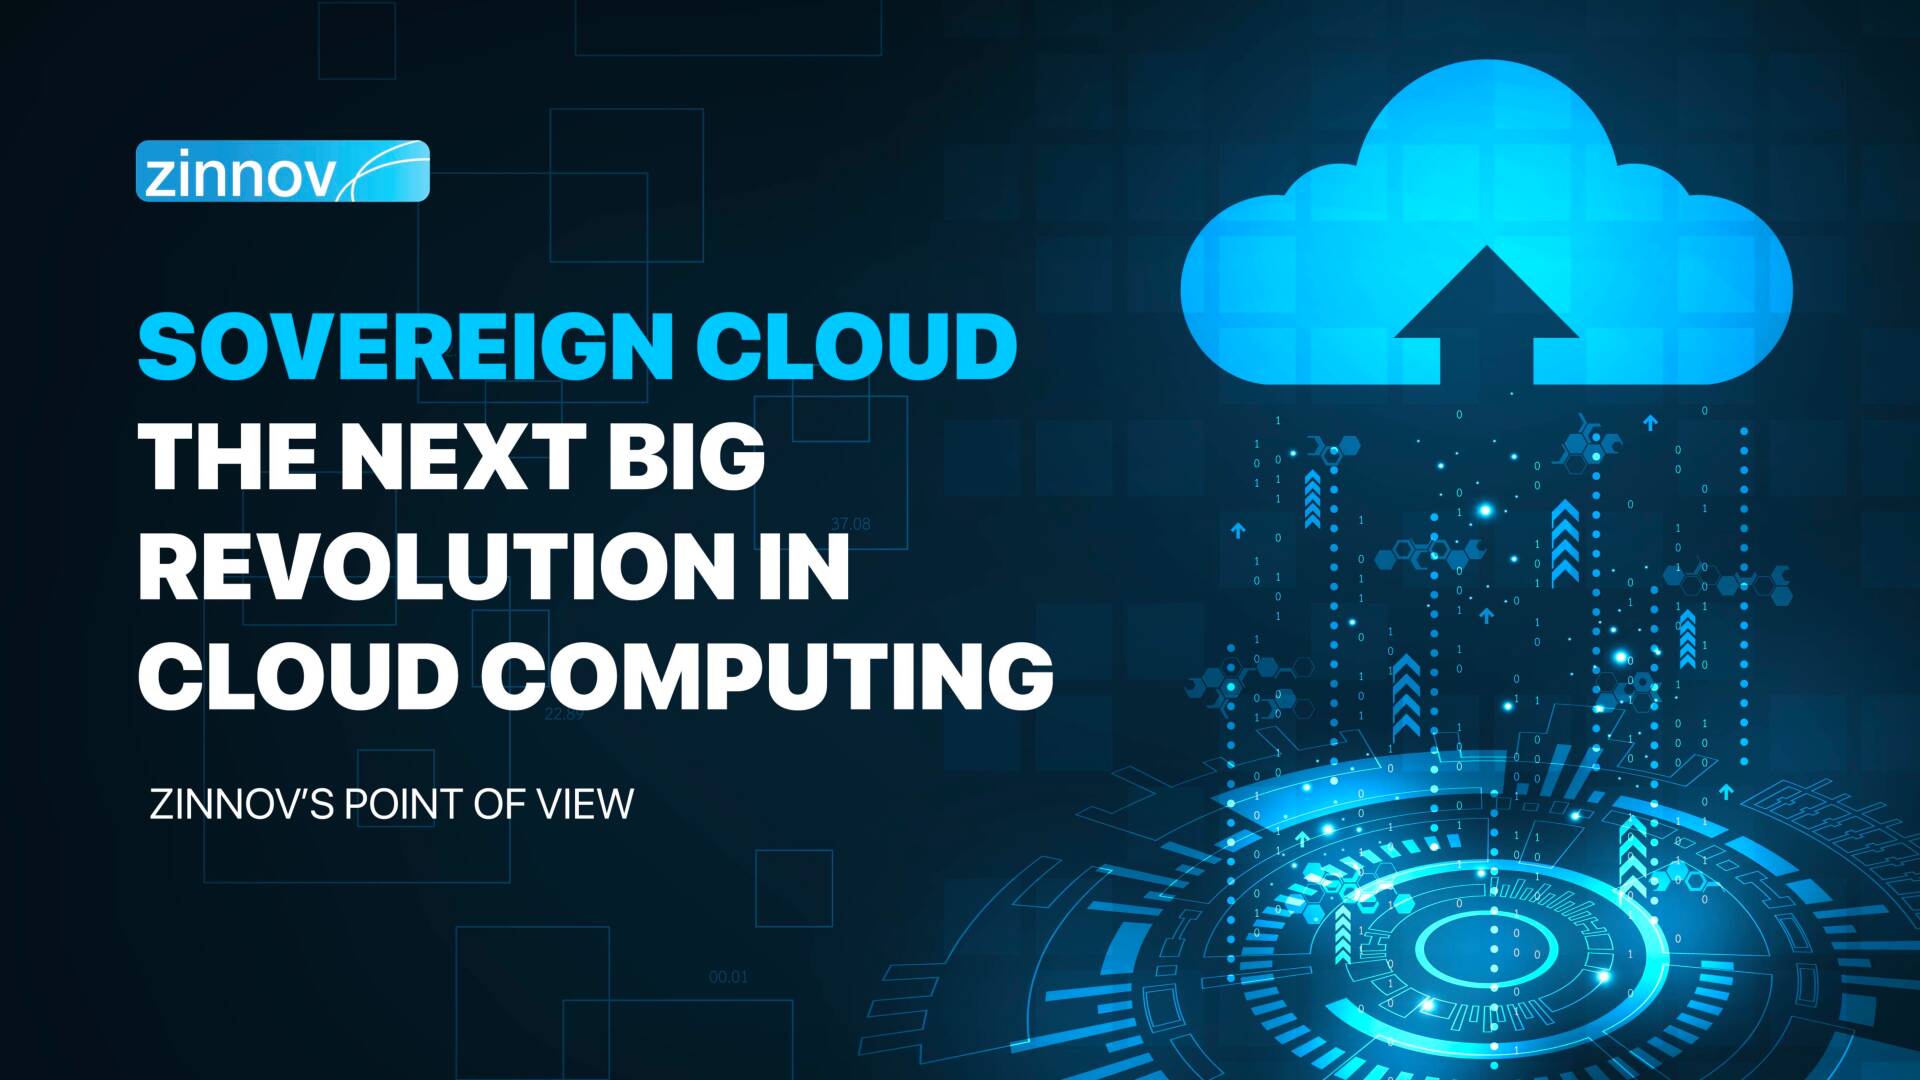 Zinnov Sovereign Cloud The Next Big Revolution In Cloud Computing 9 March Pdf1